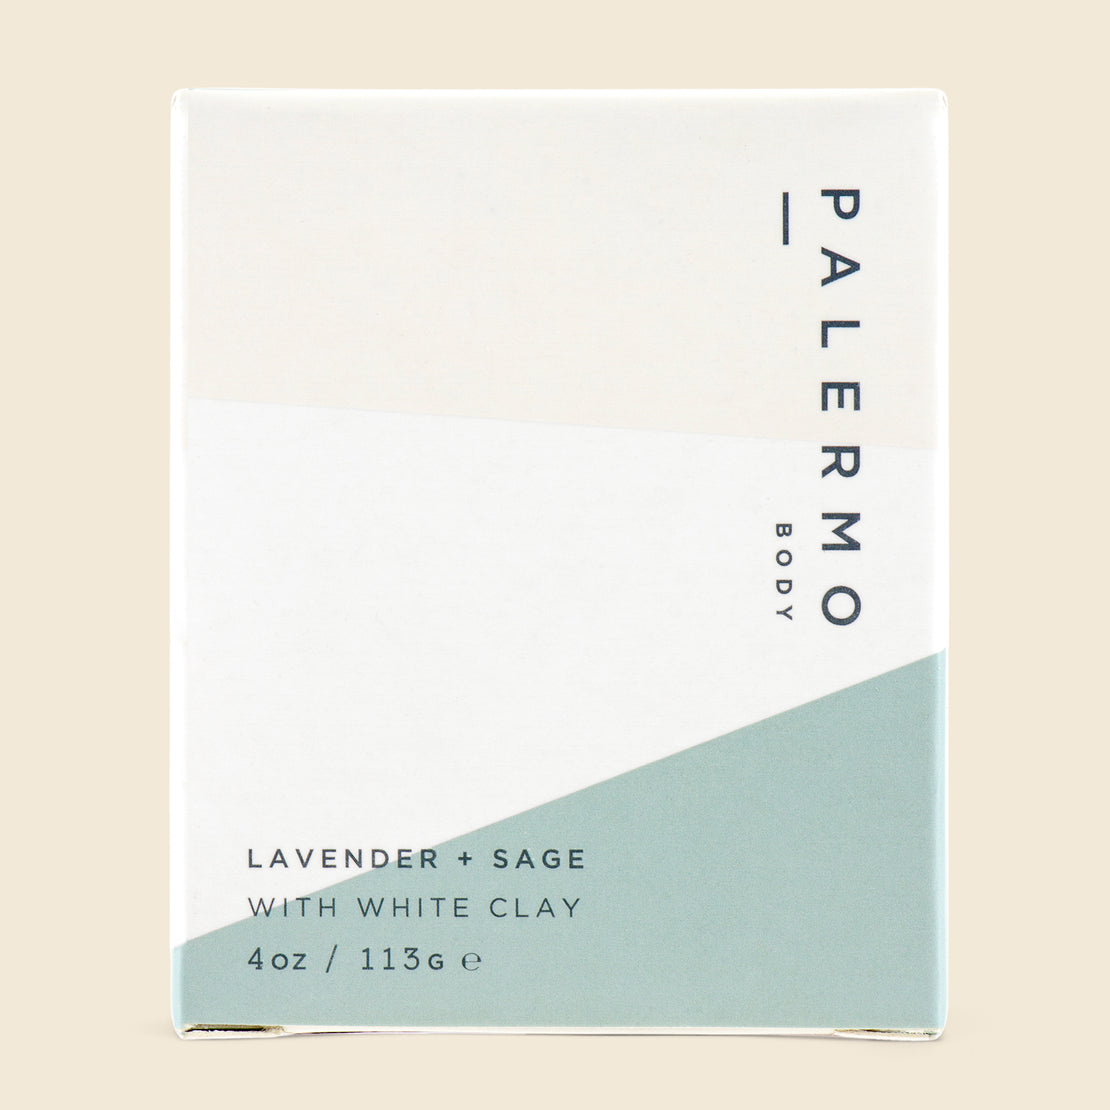 Lavender + Sage with White Clay Soap - Palermo Body - STAG Provisions - W - Chemist - Skin Care